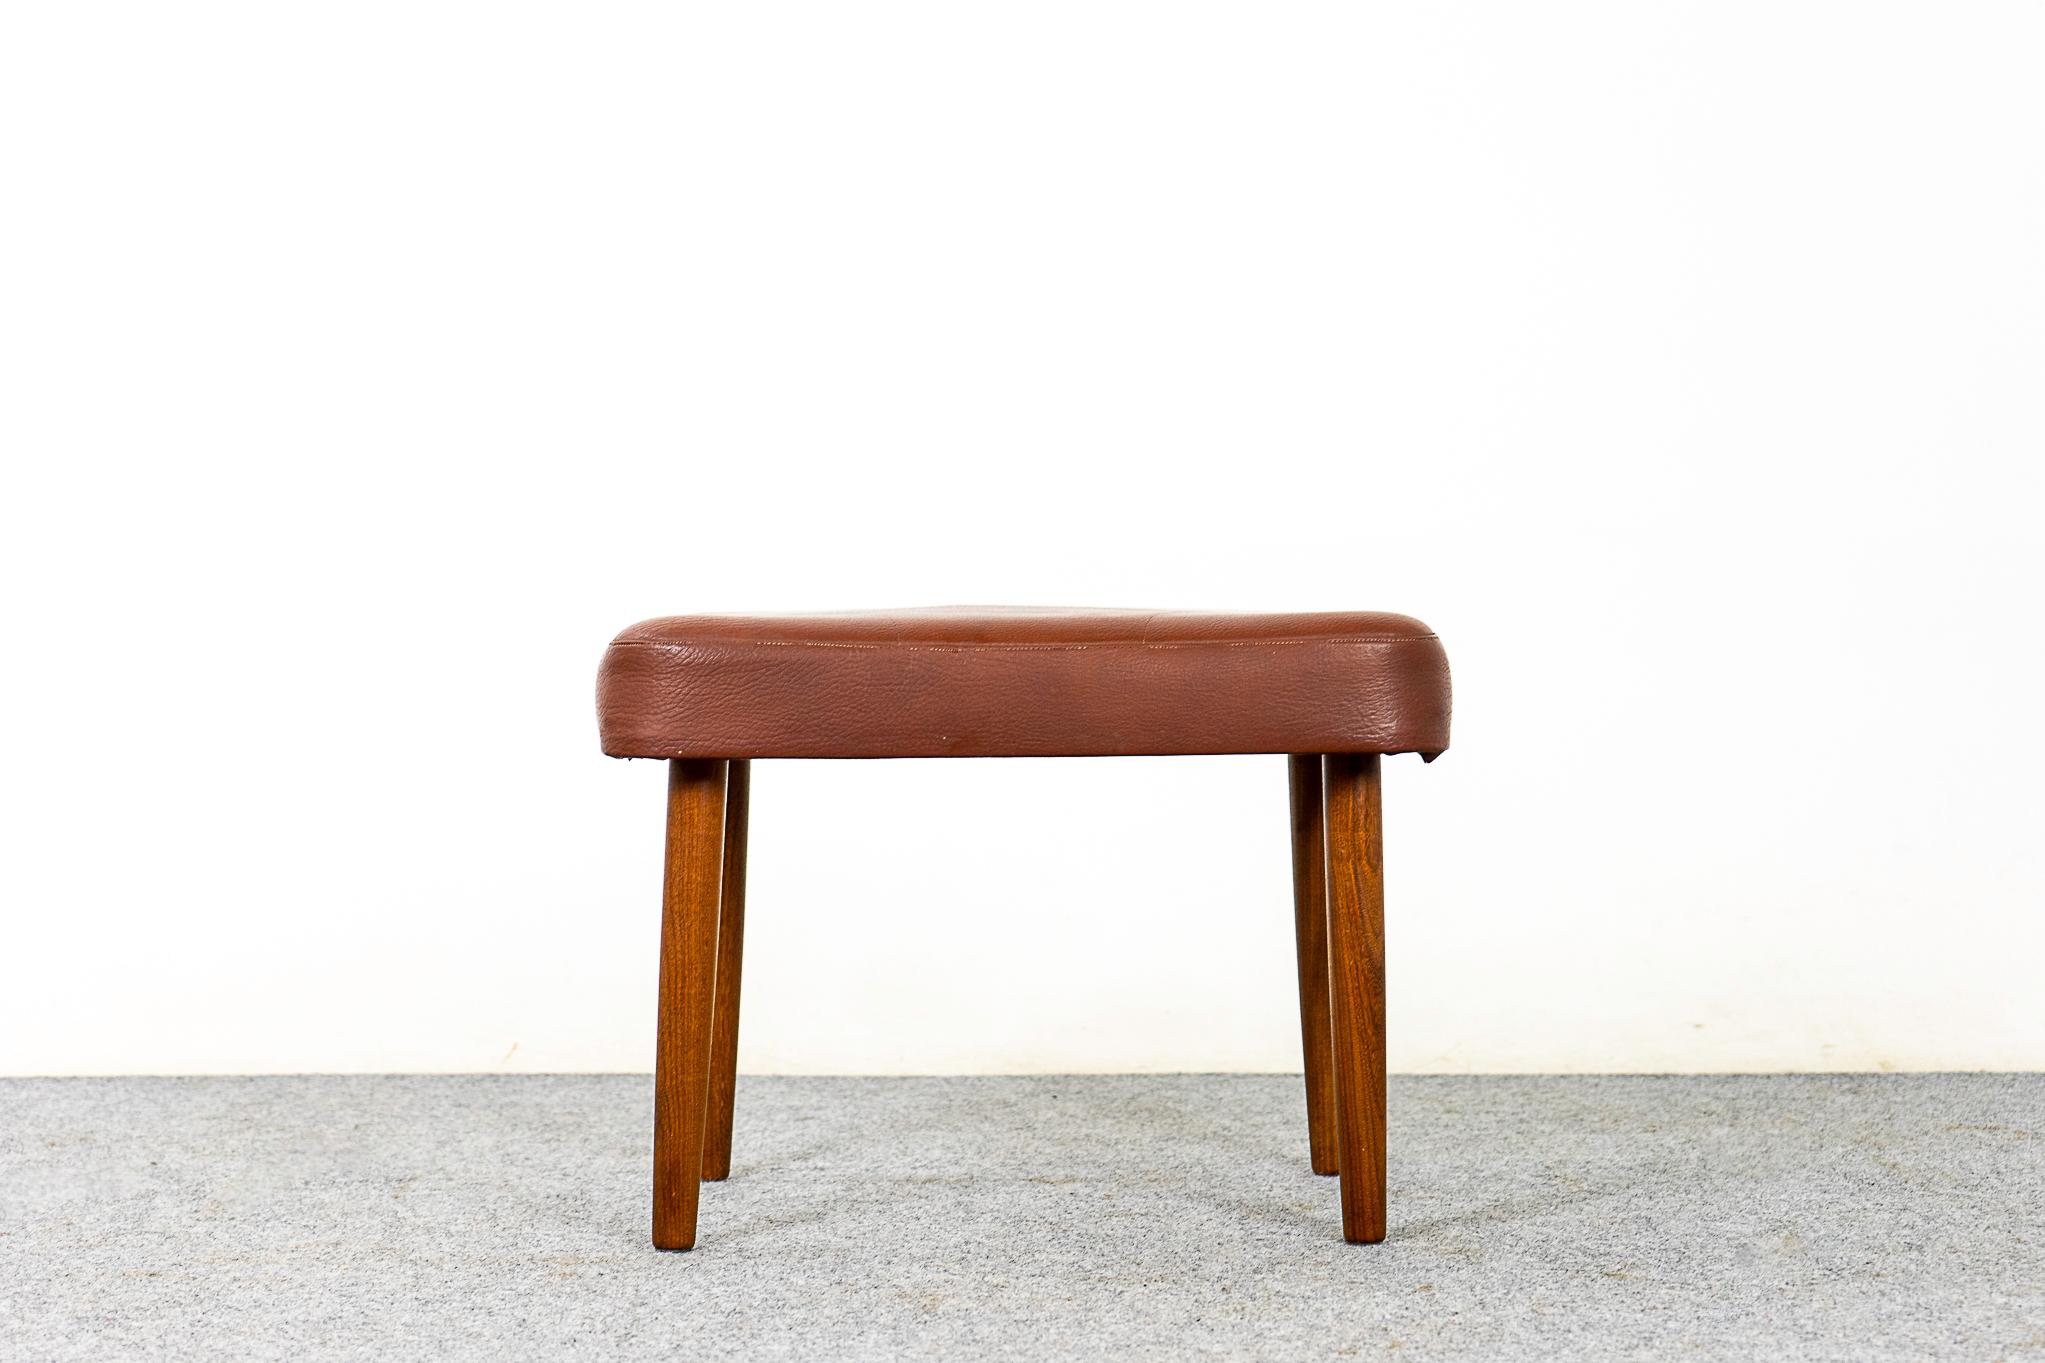 Beech & vinyl footstool, circa 1960's. Original brown vinyl and solid beech wood legs.  Compact design can be used with virtually any seating type.

Please inquire for remote and international shipping rates.